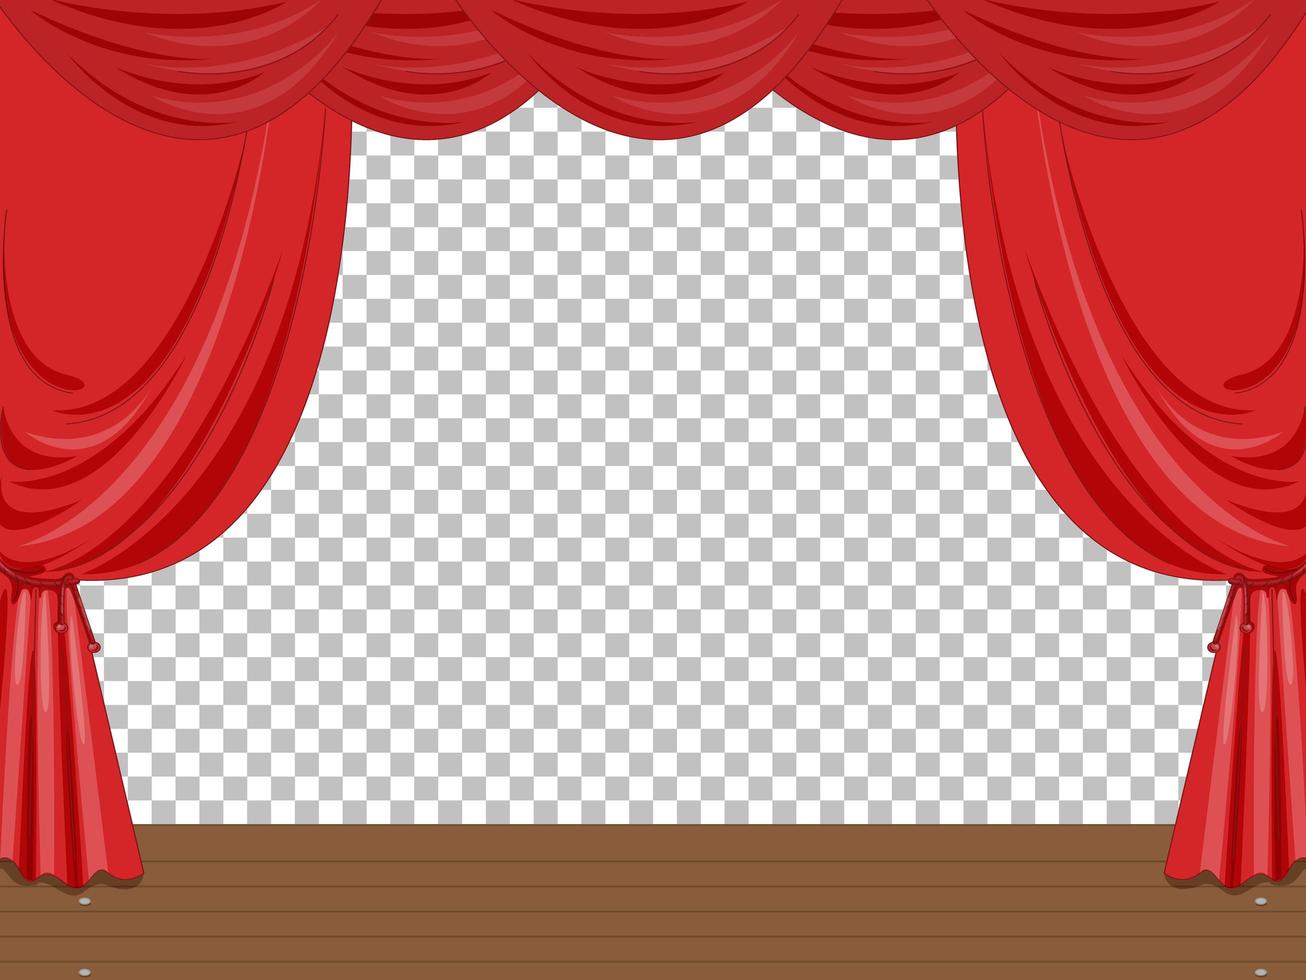 Empty stage illustration with red curtains transparent vector